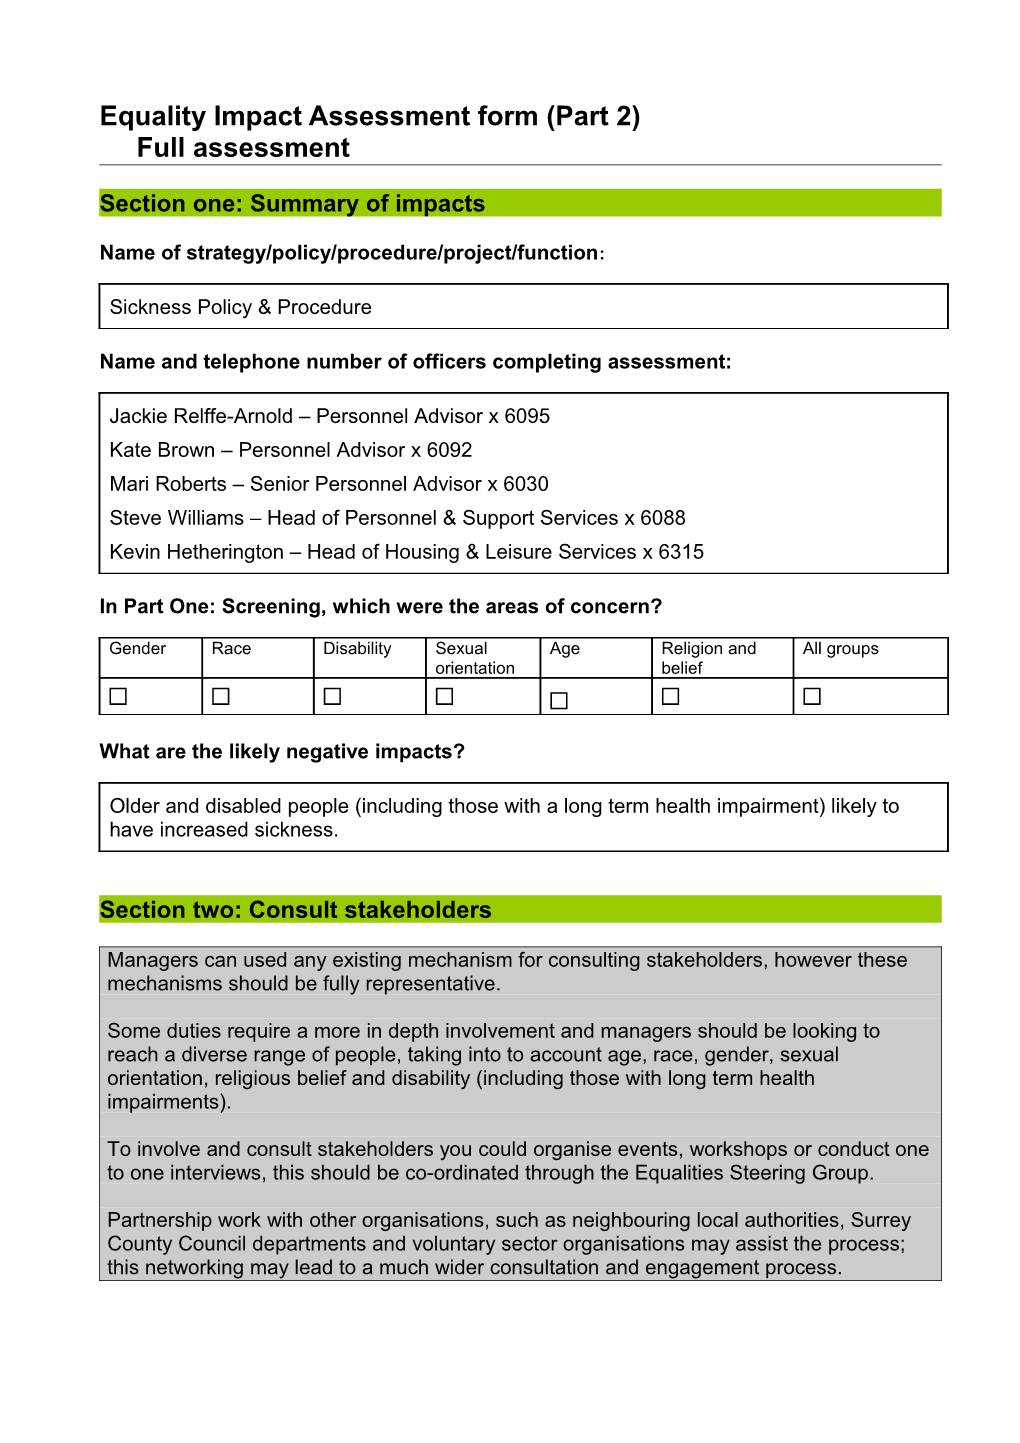 Equality Impact Assessment Form (Part 2)